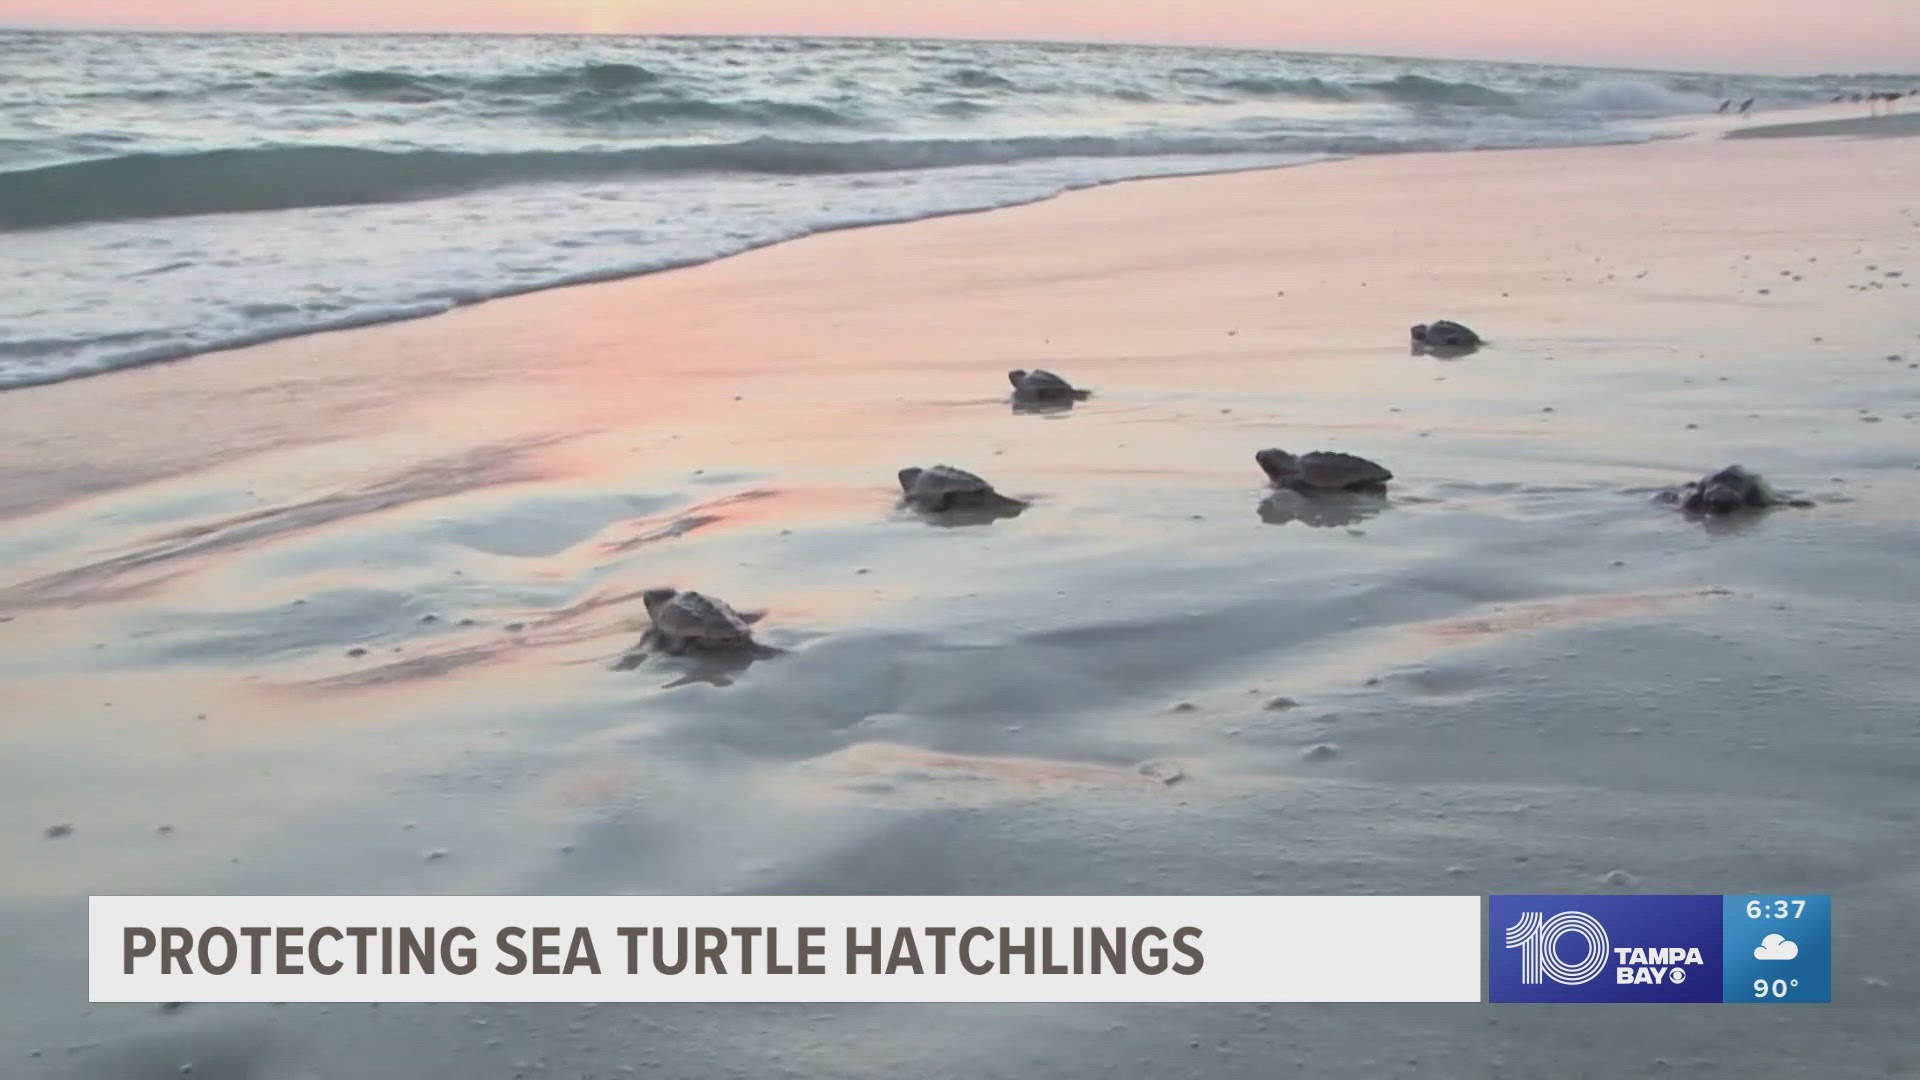 This holiday weekend, sea turtles' journeys faced some unexpected obstacles.